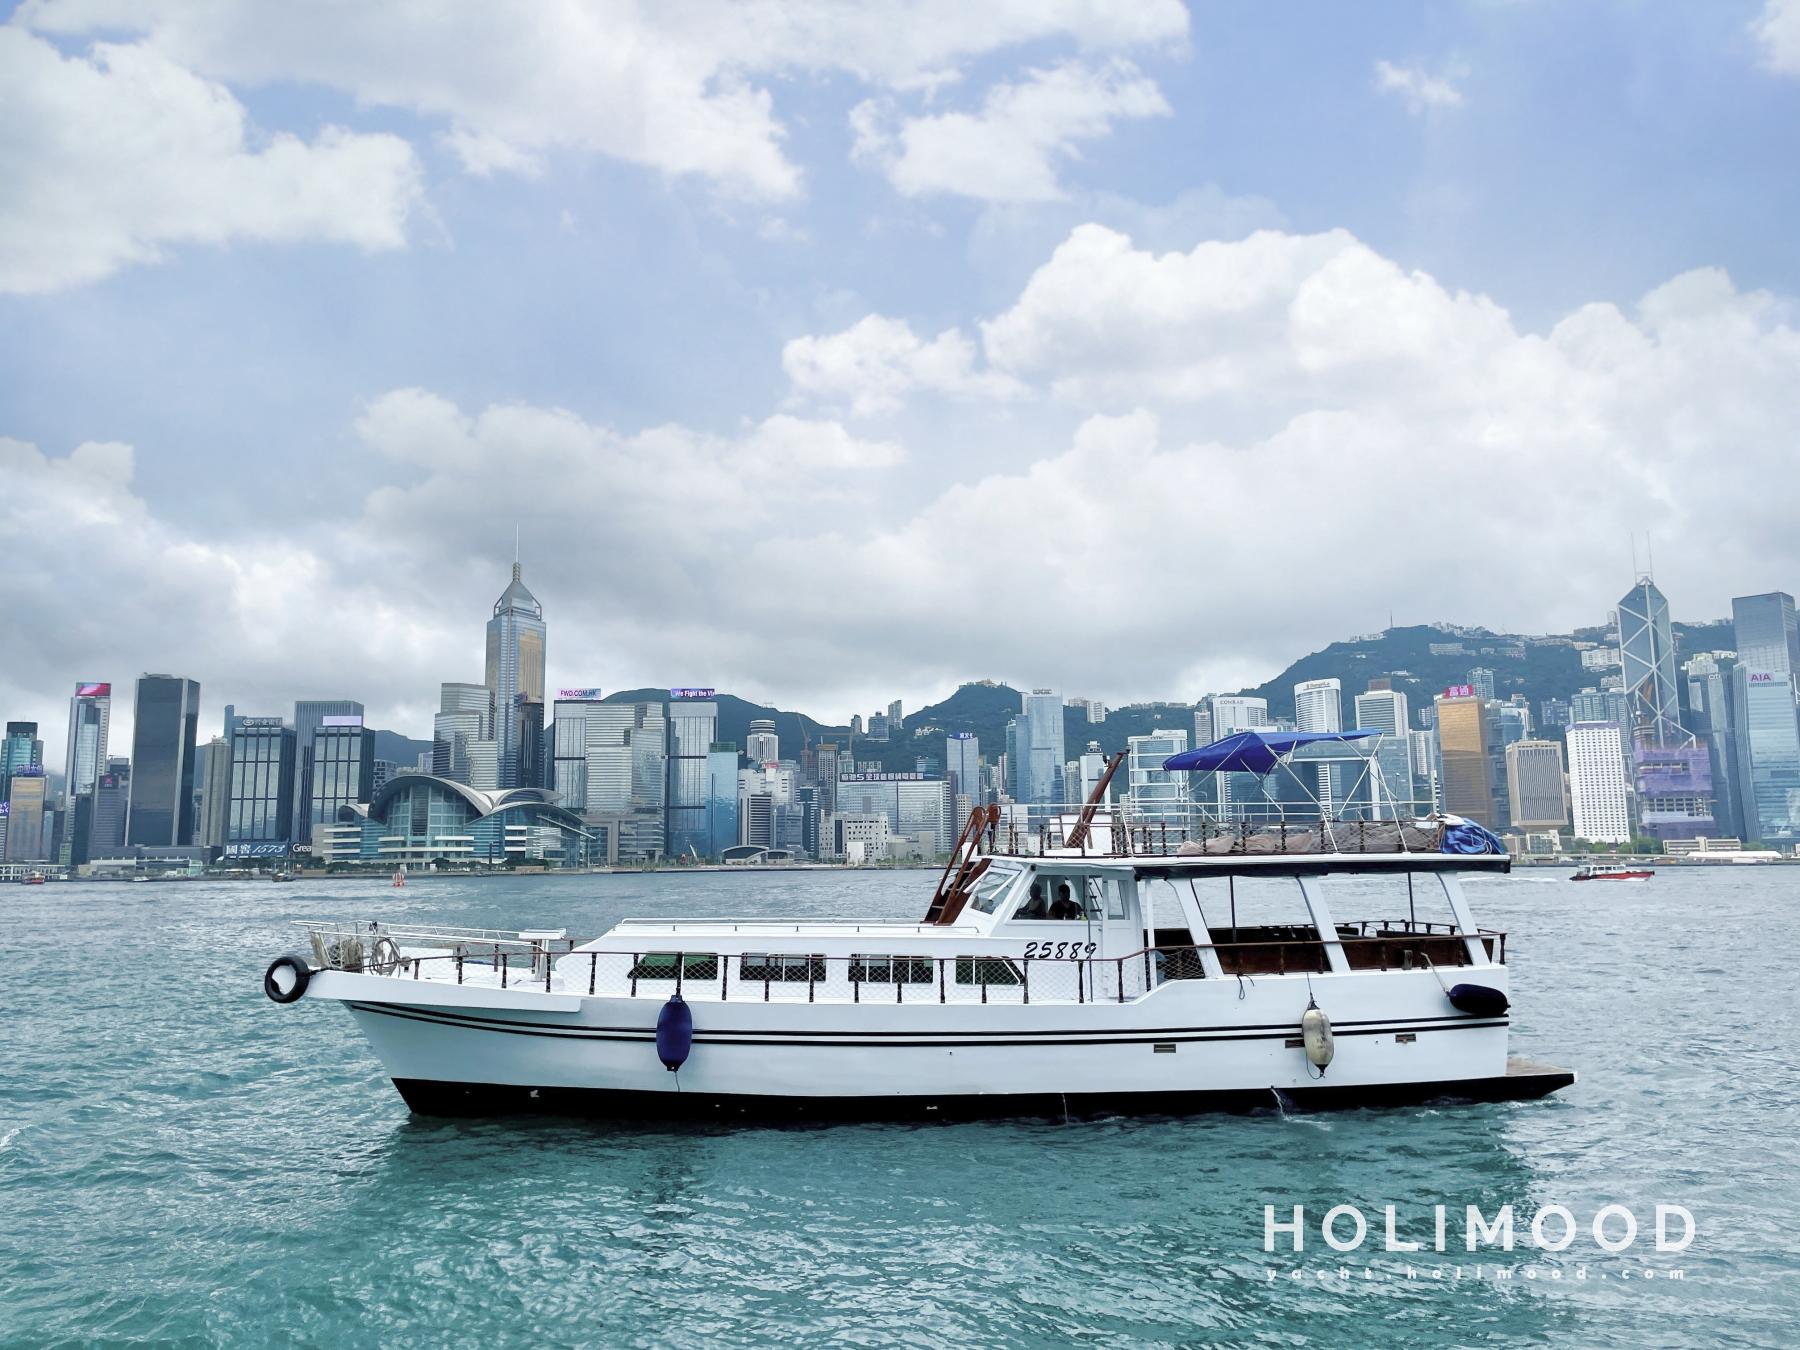 LT01 Pick up & drop off at Victoria Harbour , Spacious, from $428/ppl Boat Party All Inclusive Package (recommended for weekdays) 2